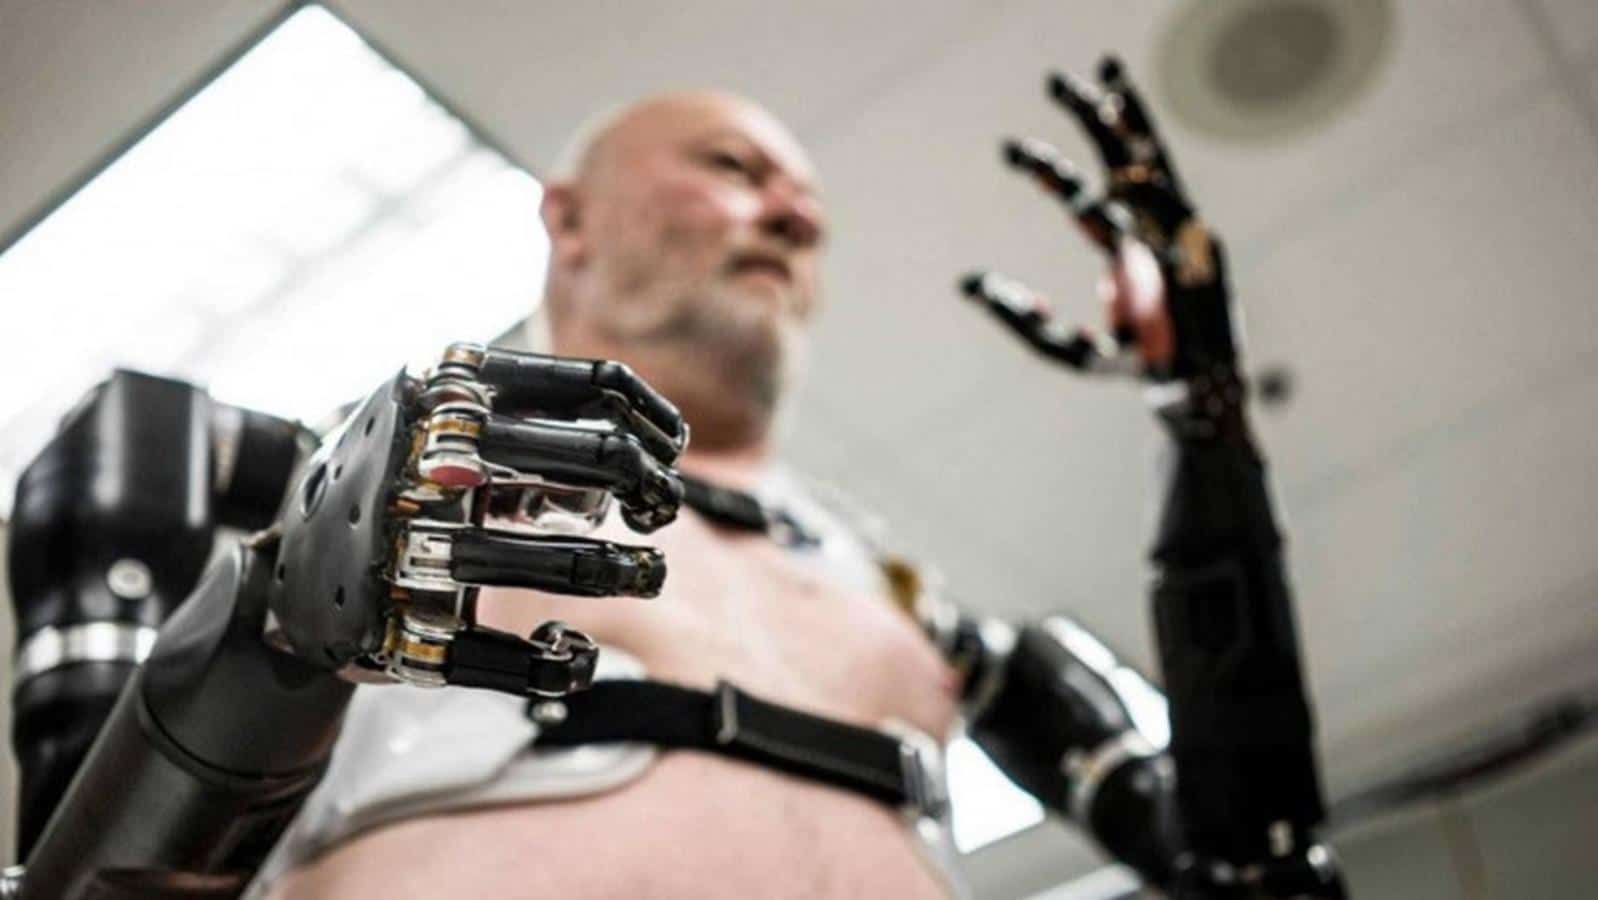 This is Atom Touch, the world's first such advanced hand prosthesis